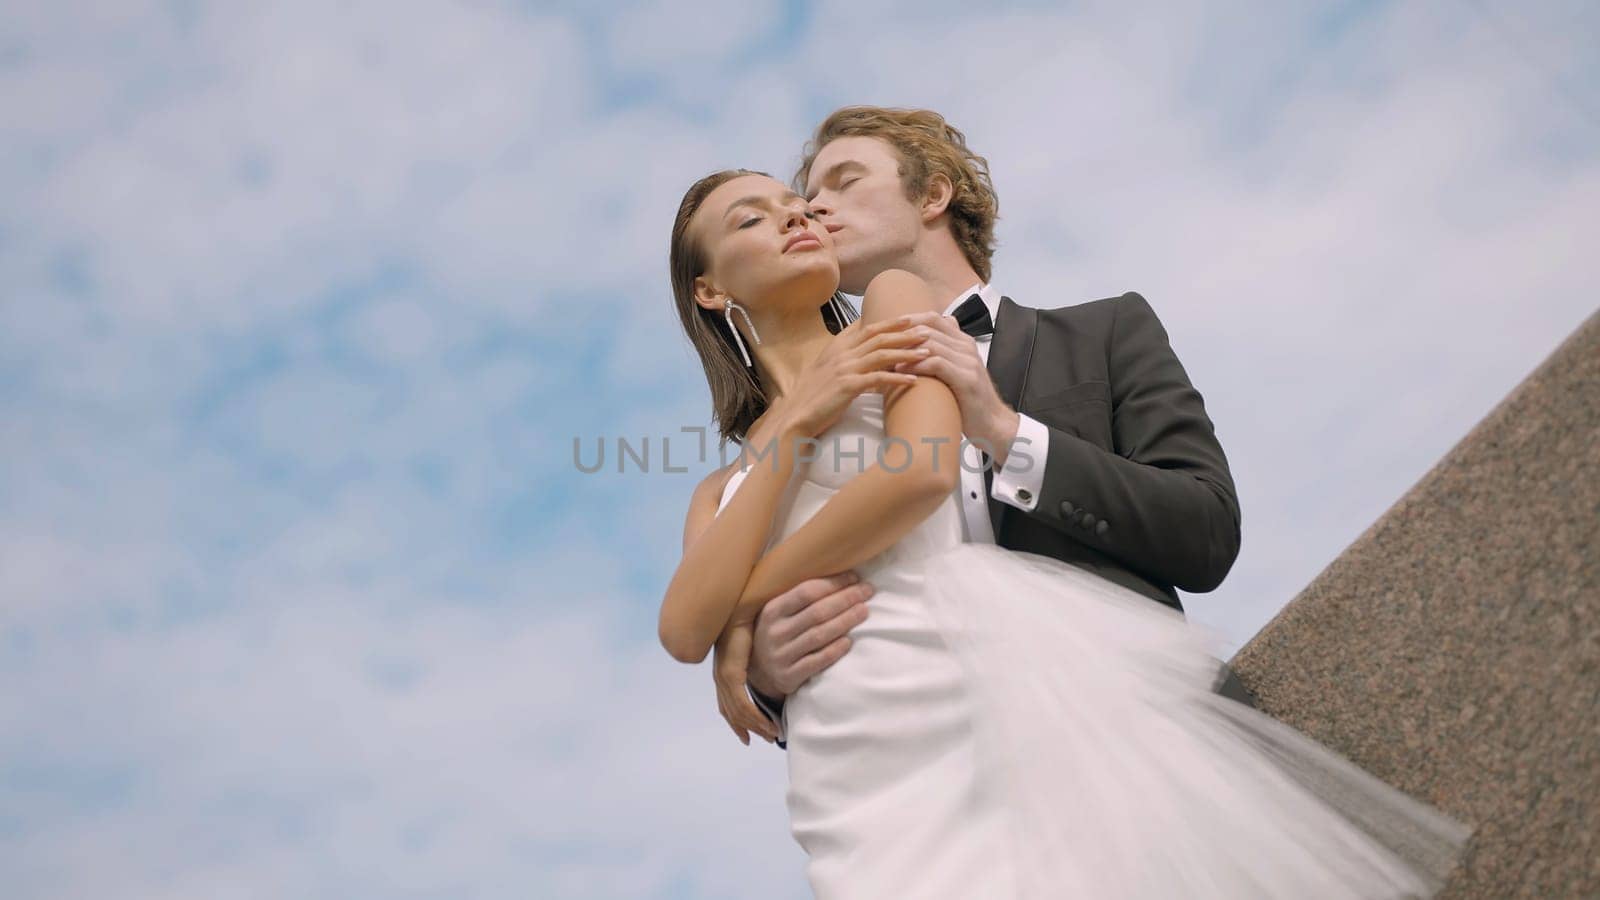 Bottom view of stylish caring bride and groom on blue sky background with clouds. Action. Man in black and white suit kissing woman cheek in white dress